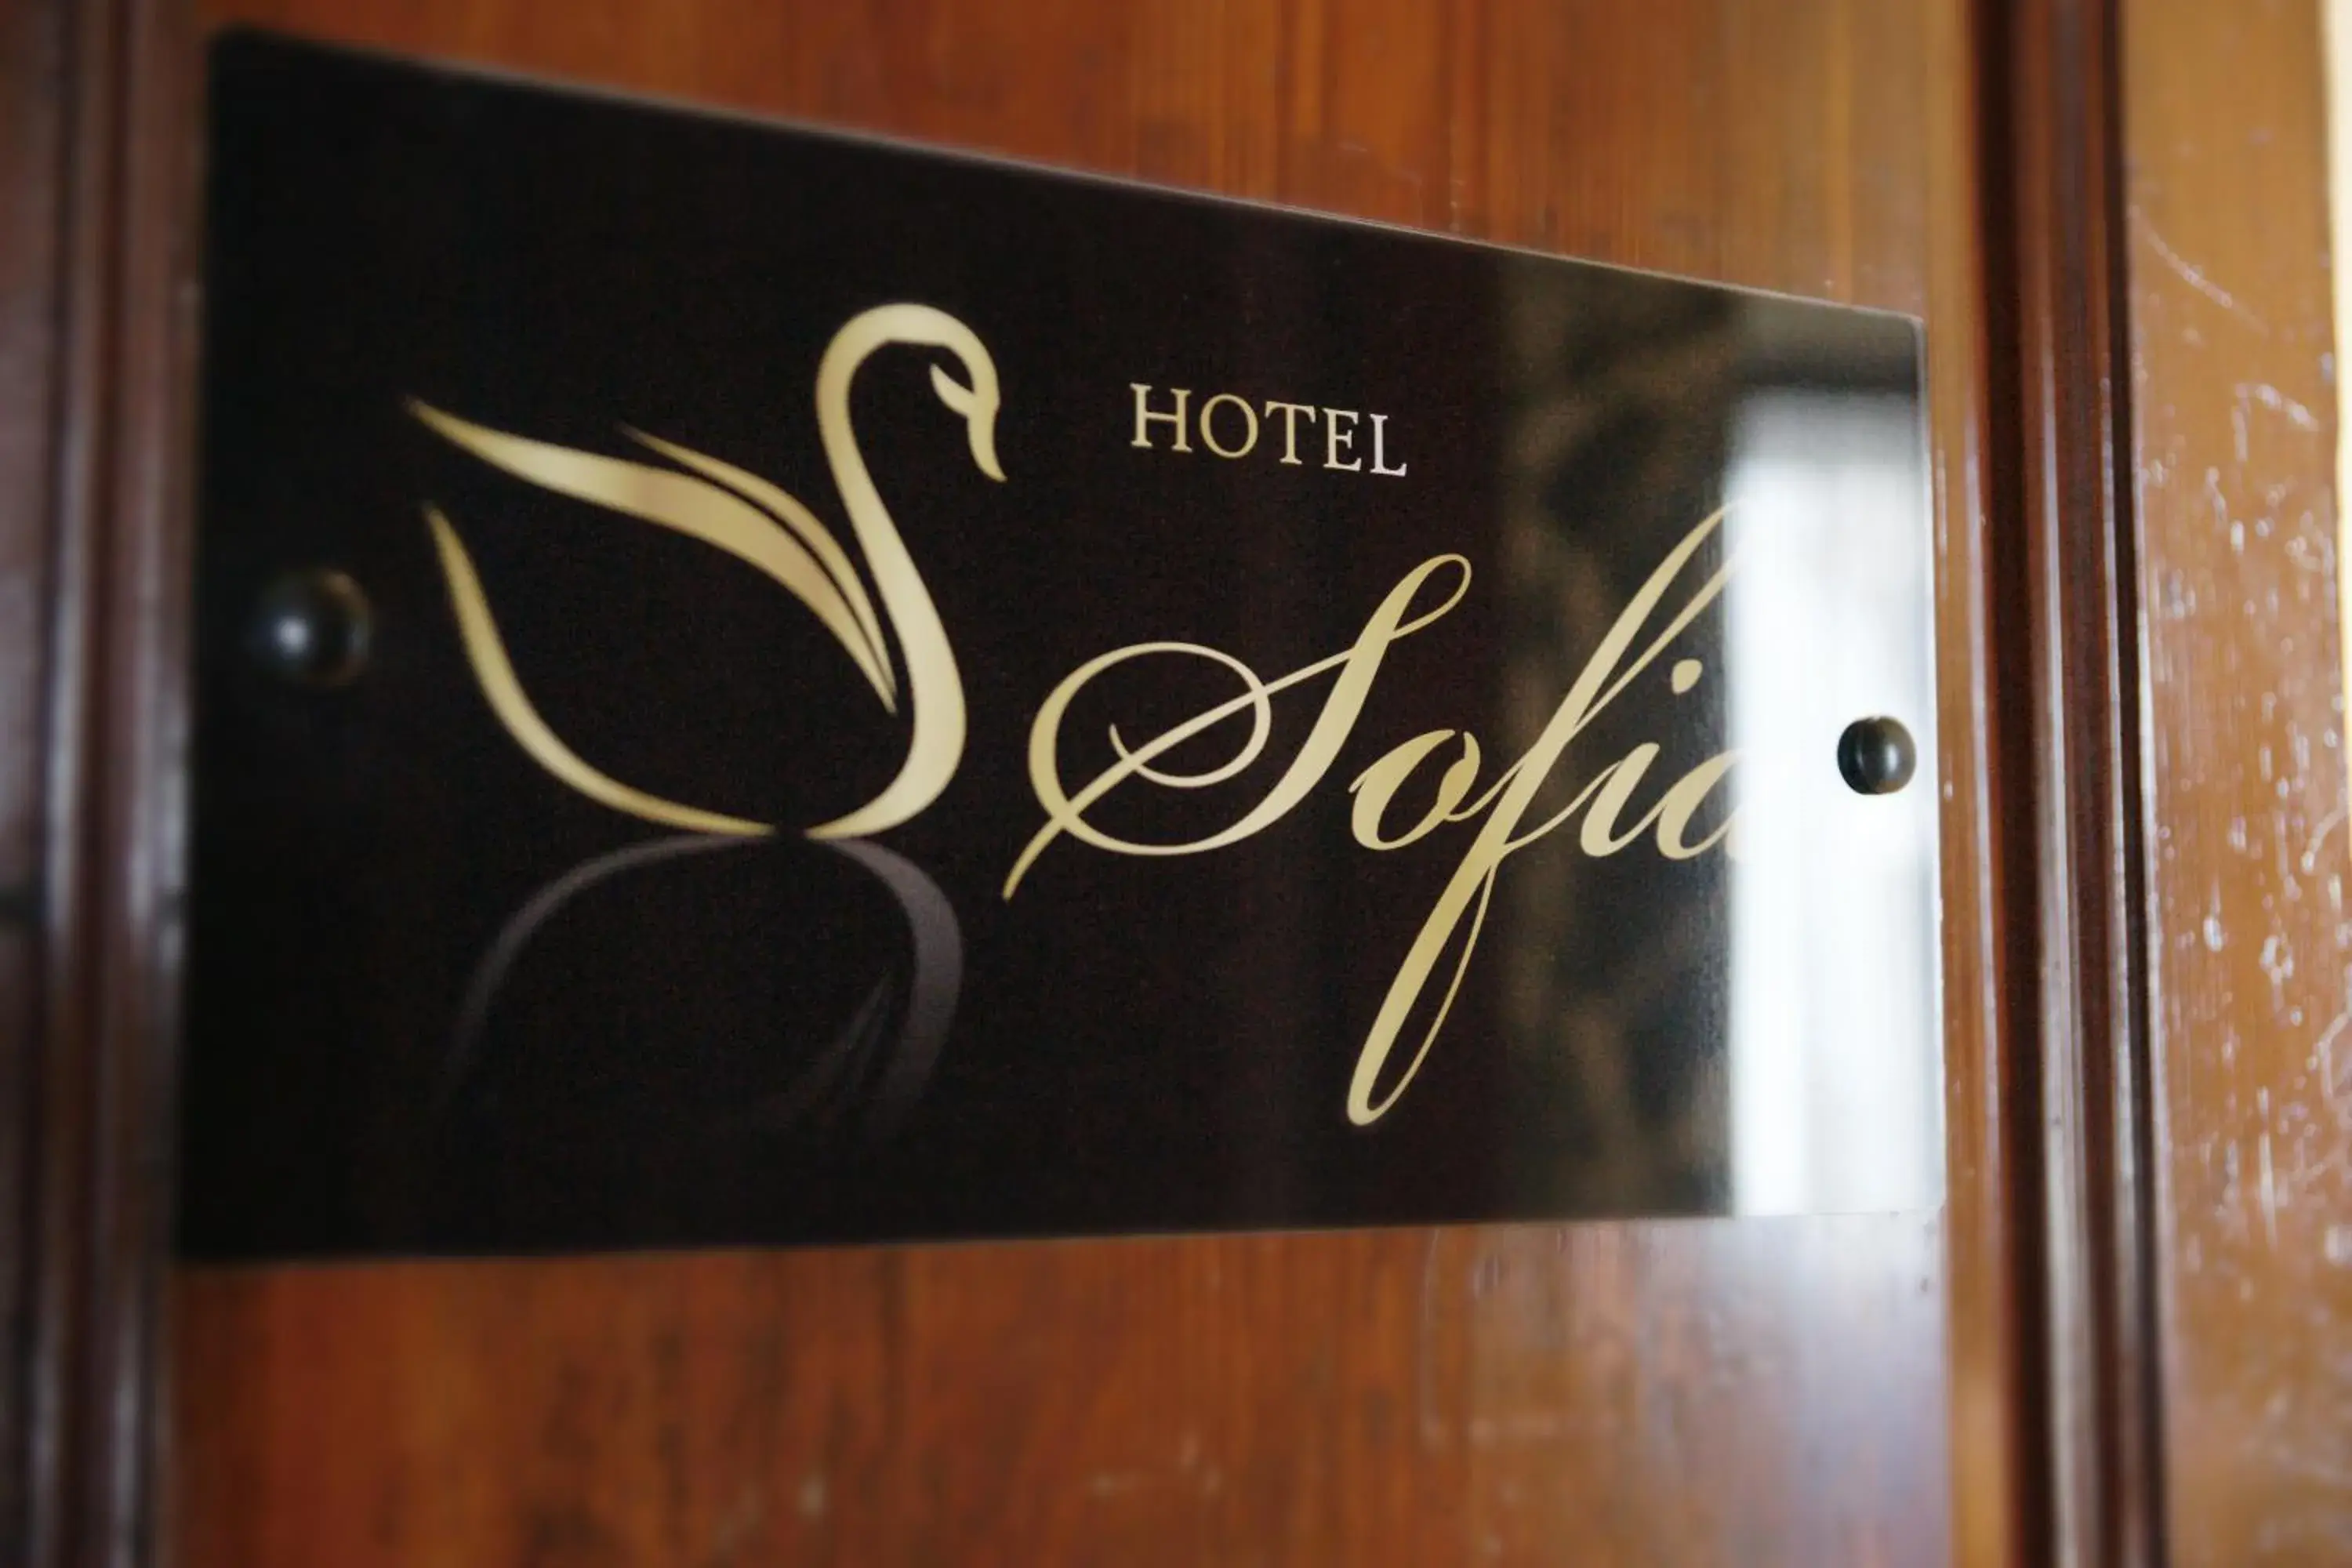 Property logo or sign in Hotel Sofia